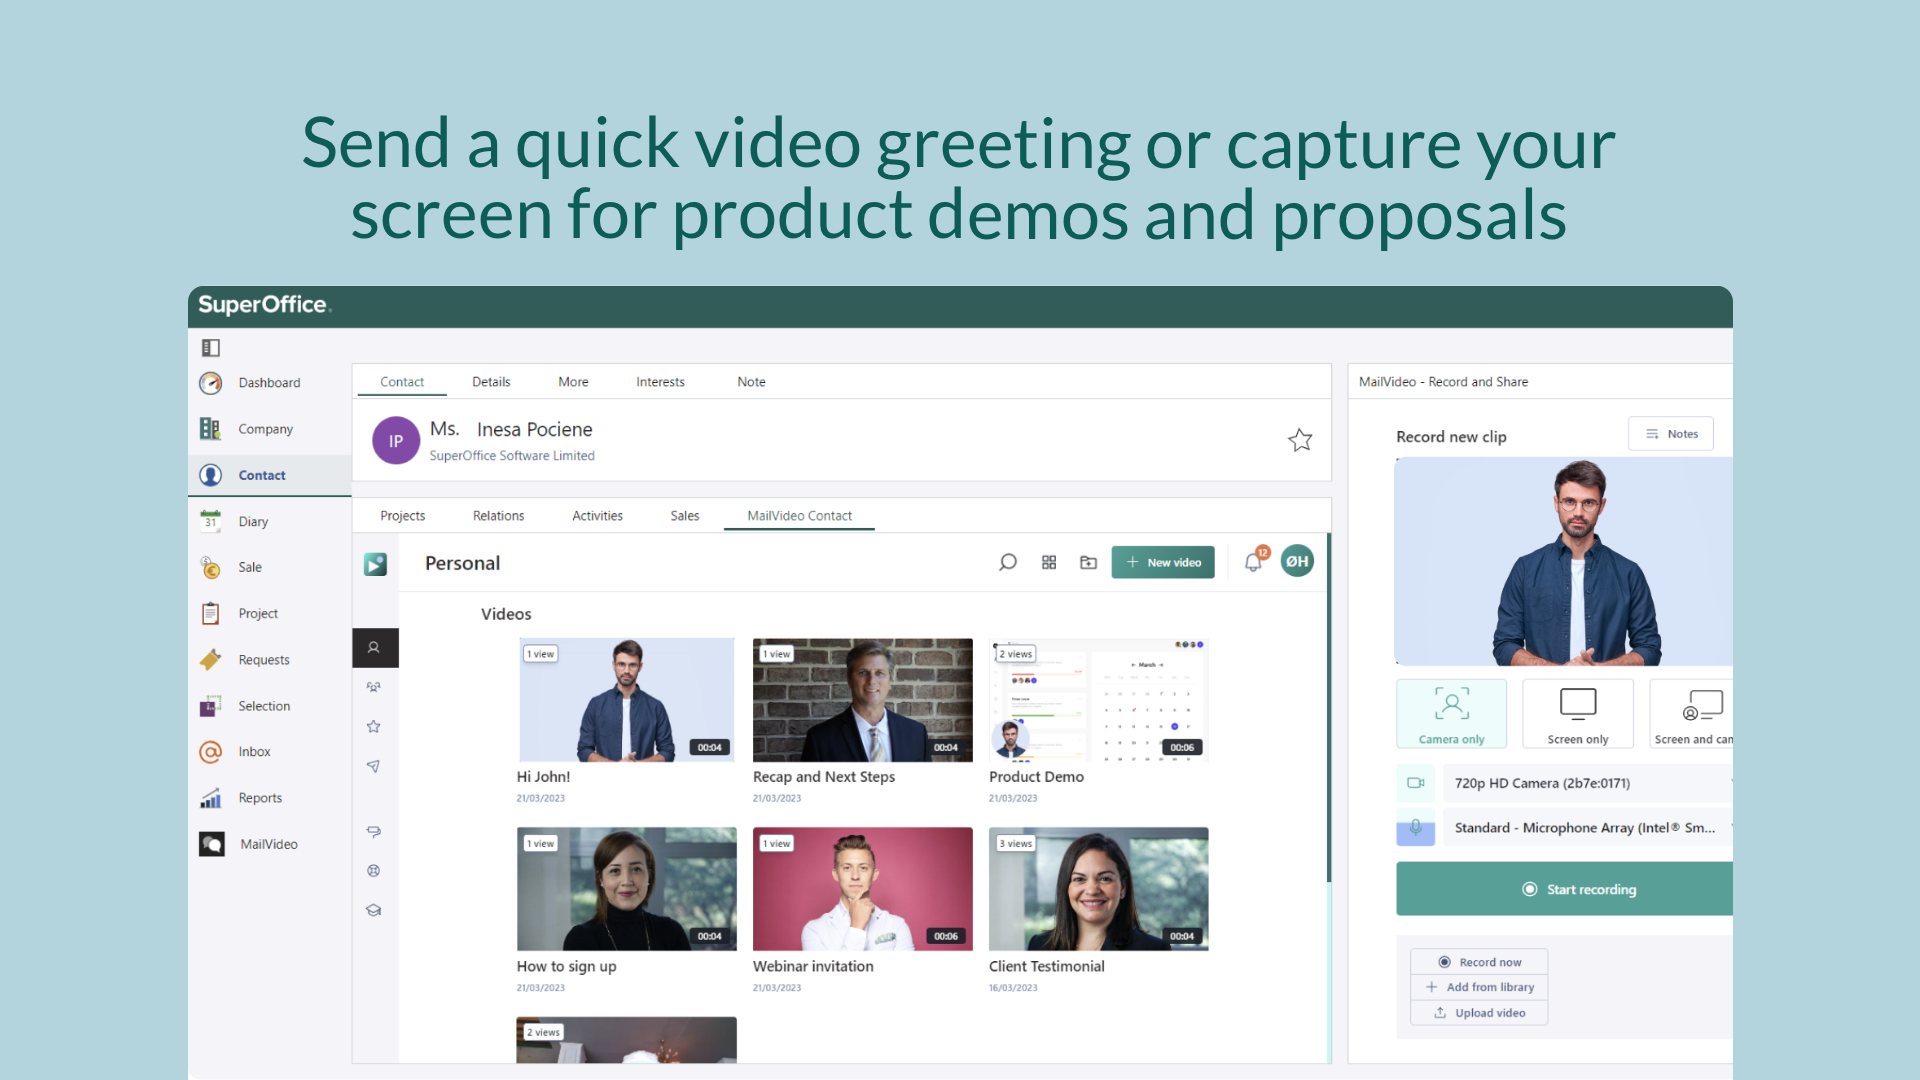 Send a quick video greeting or capture your screen for product demos and proposals